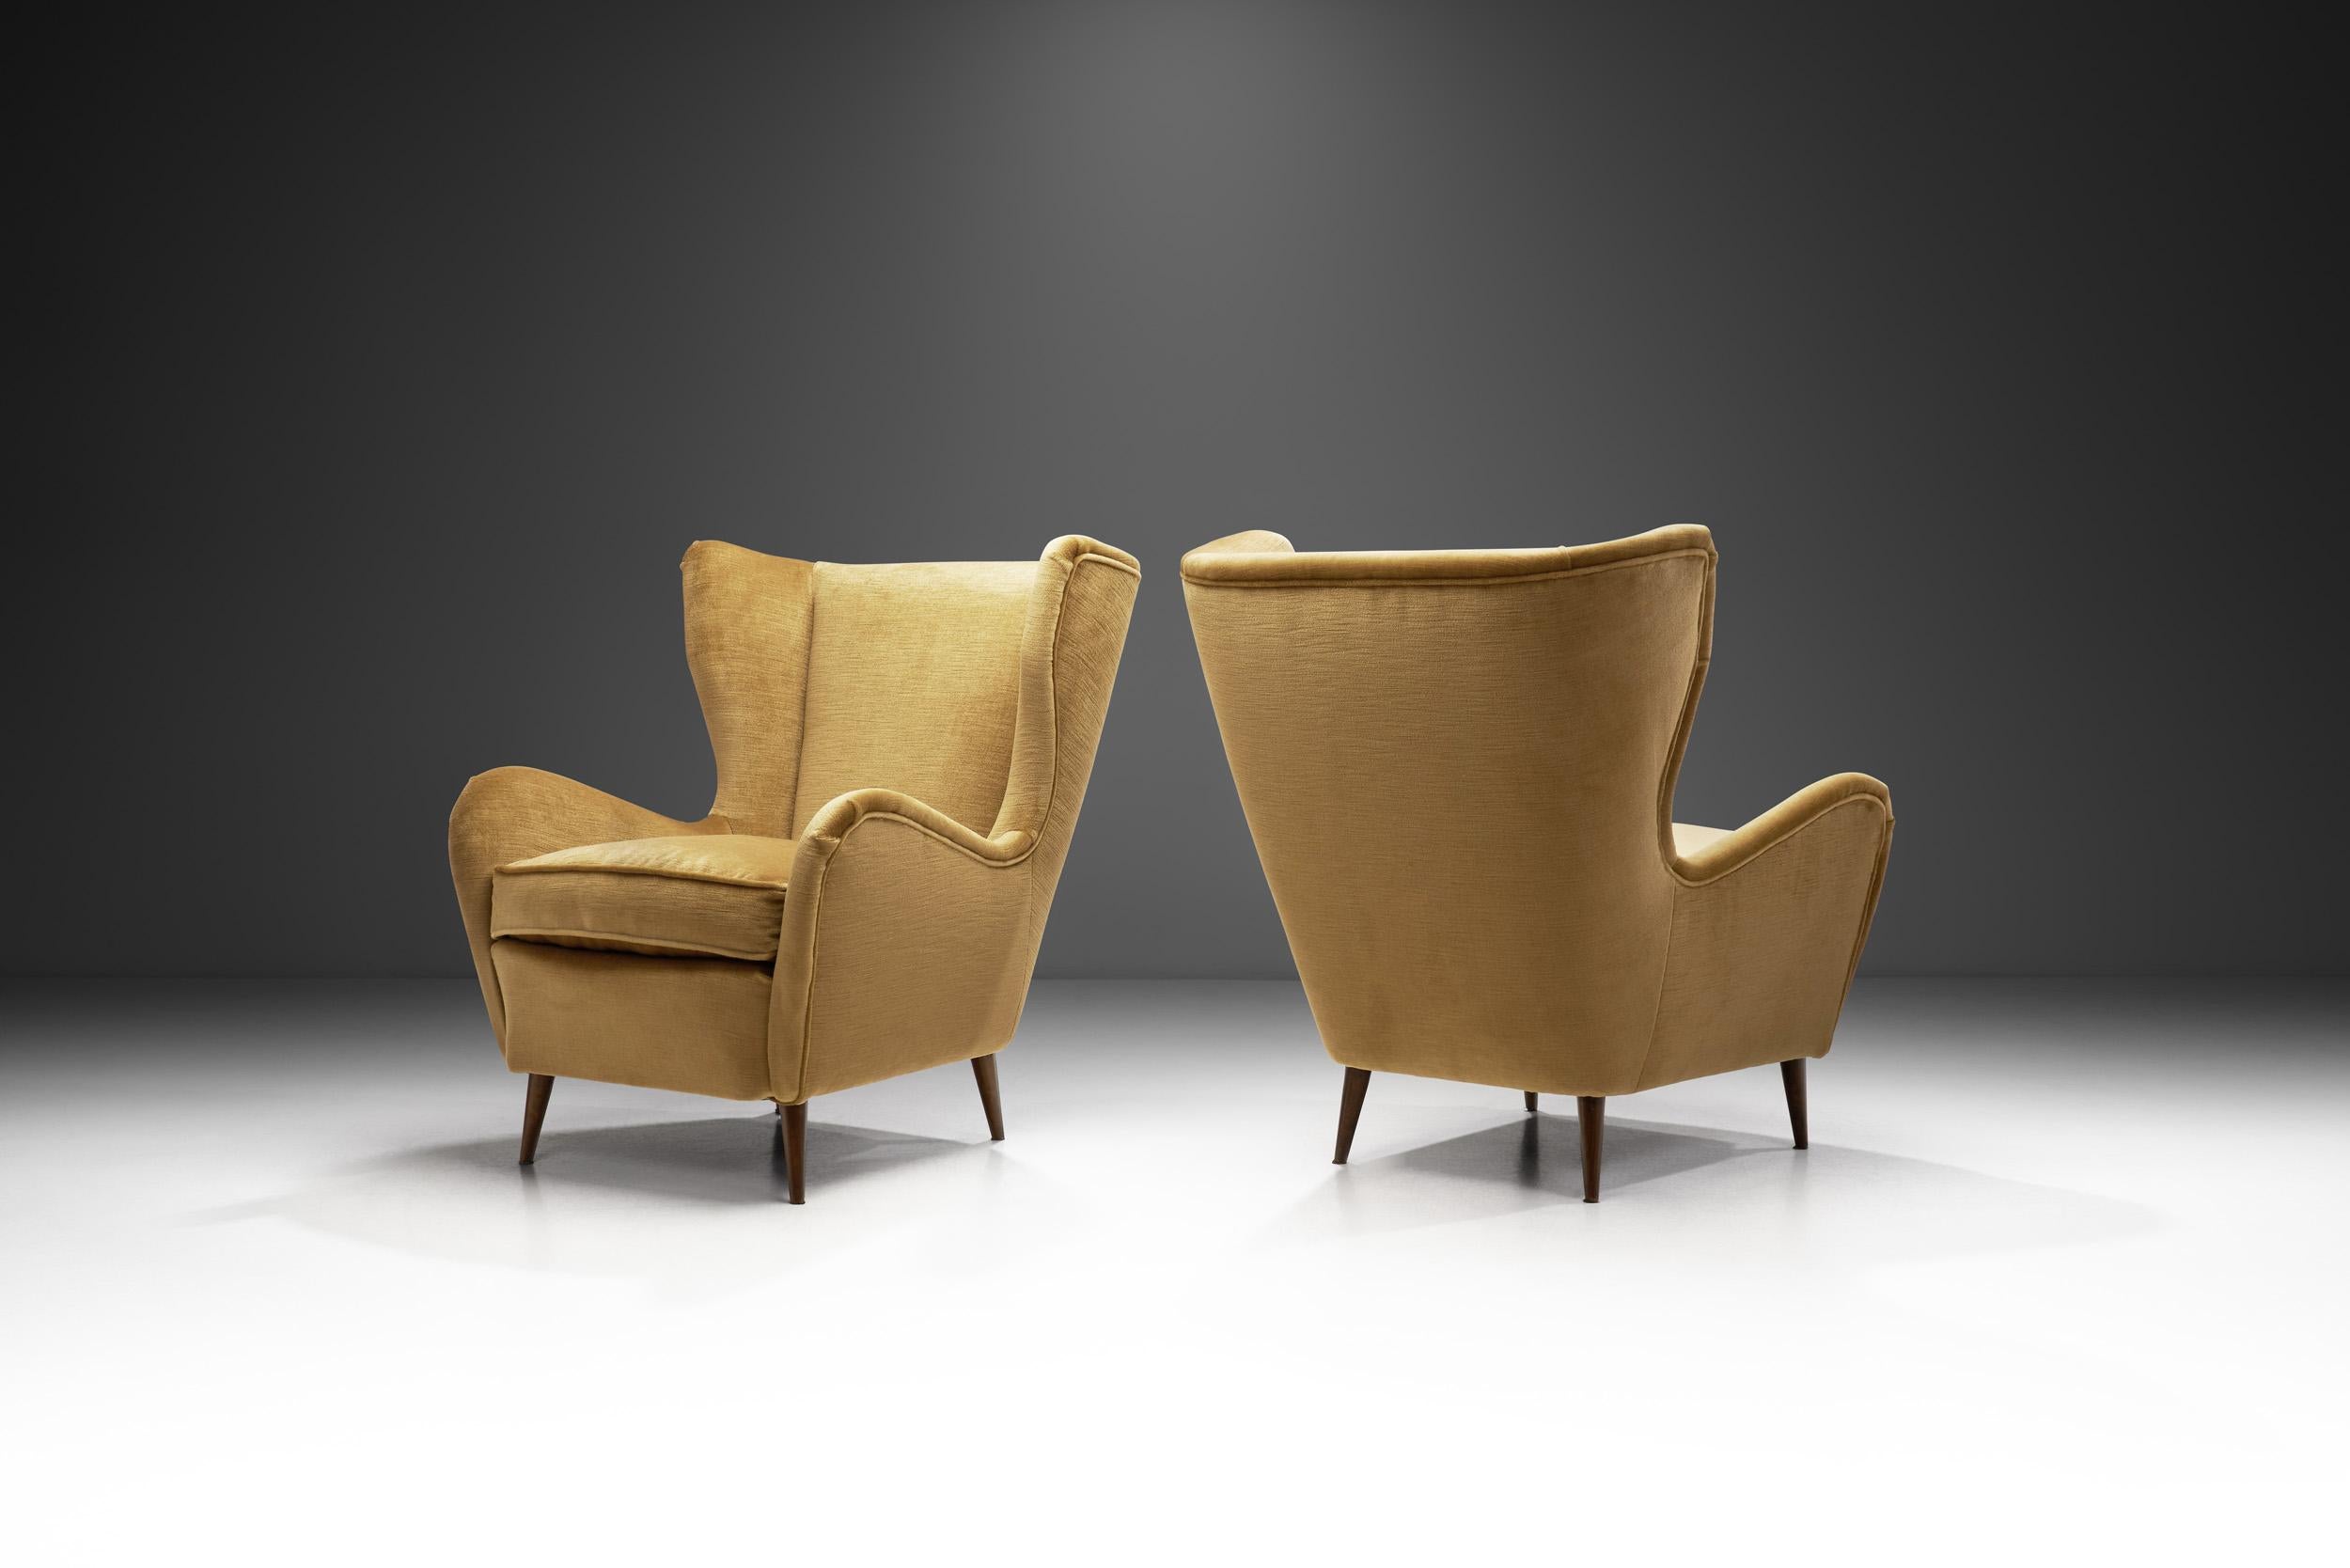 Mid-20th Century Italian Mid-Century Modern Lounge Chairs with Tapered Legs, Italy 1950s